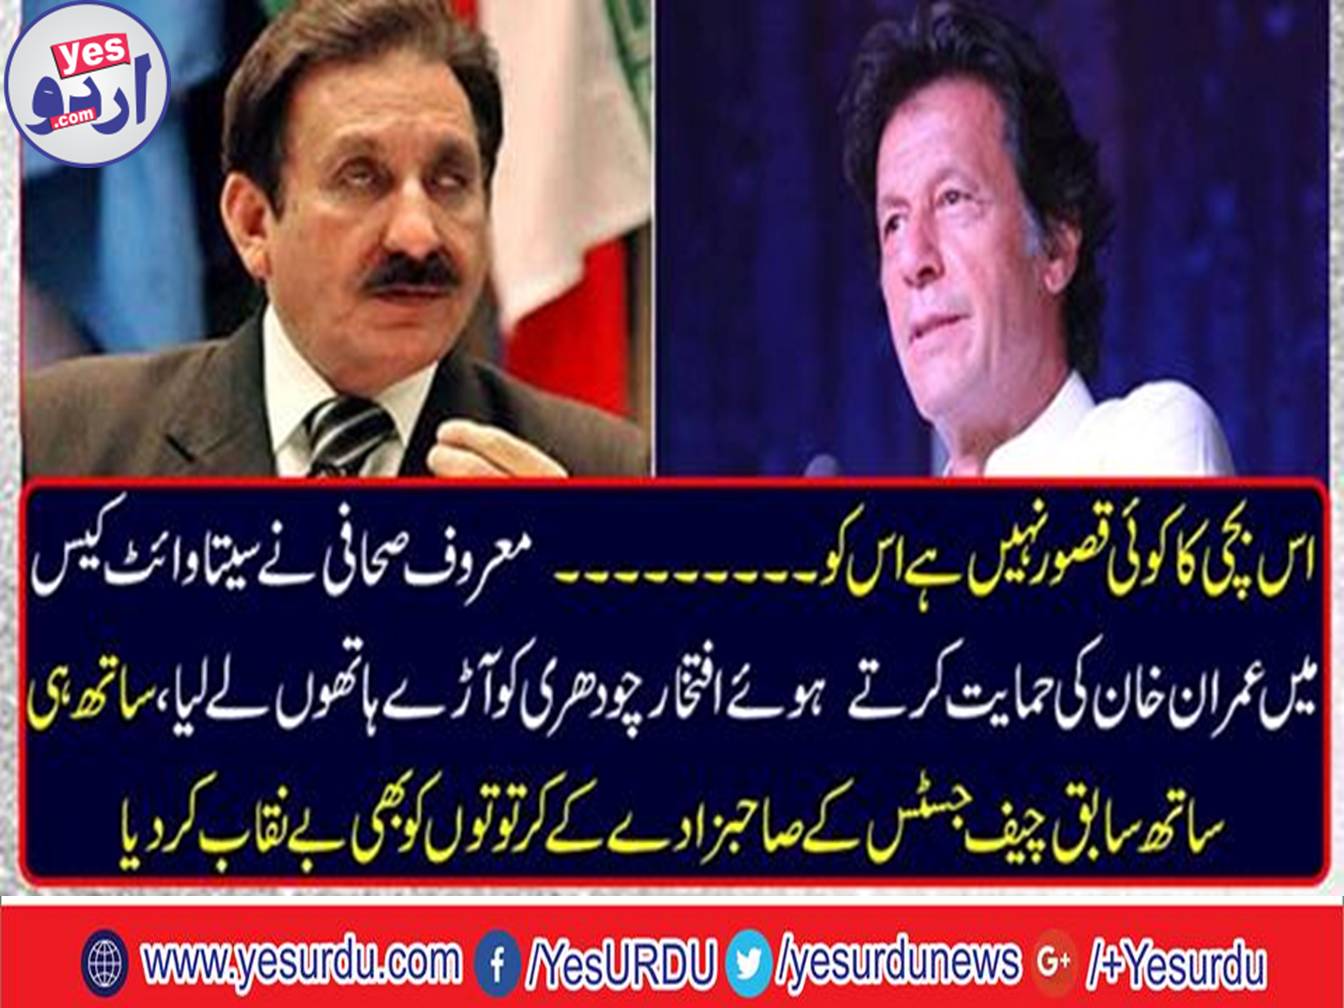 Former Chief Justice Iftikhar Chaudhry, is bringing Sita White case against Imran Khan so they should not do that